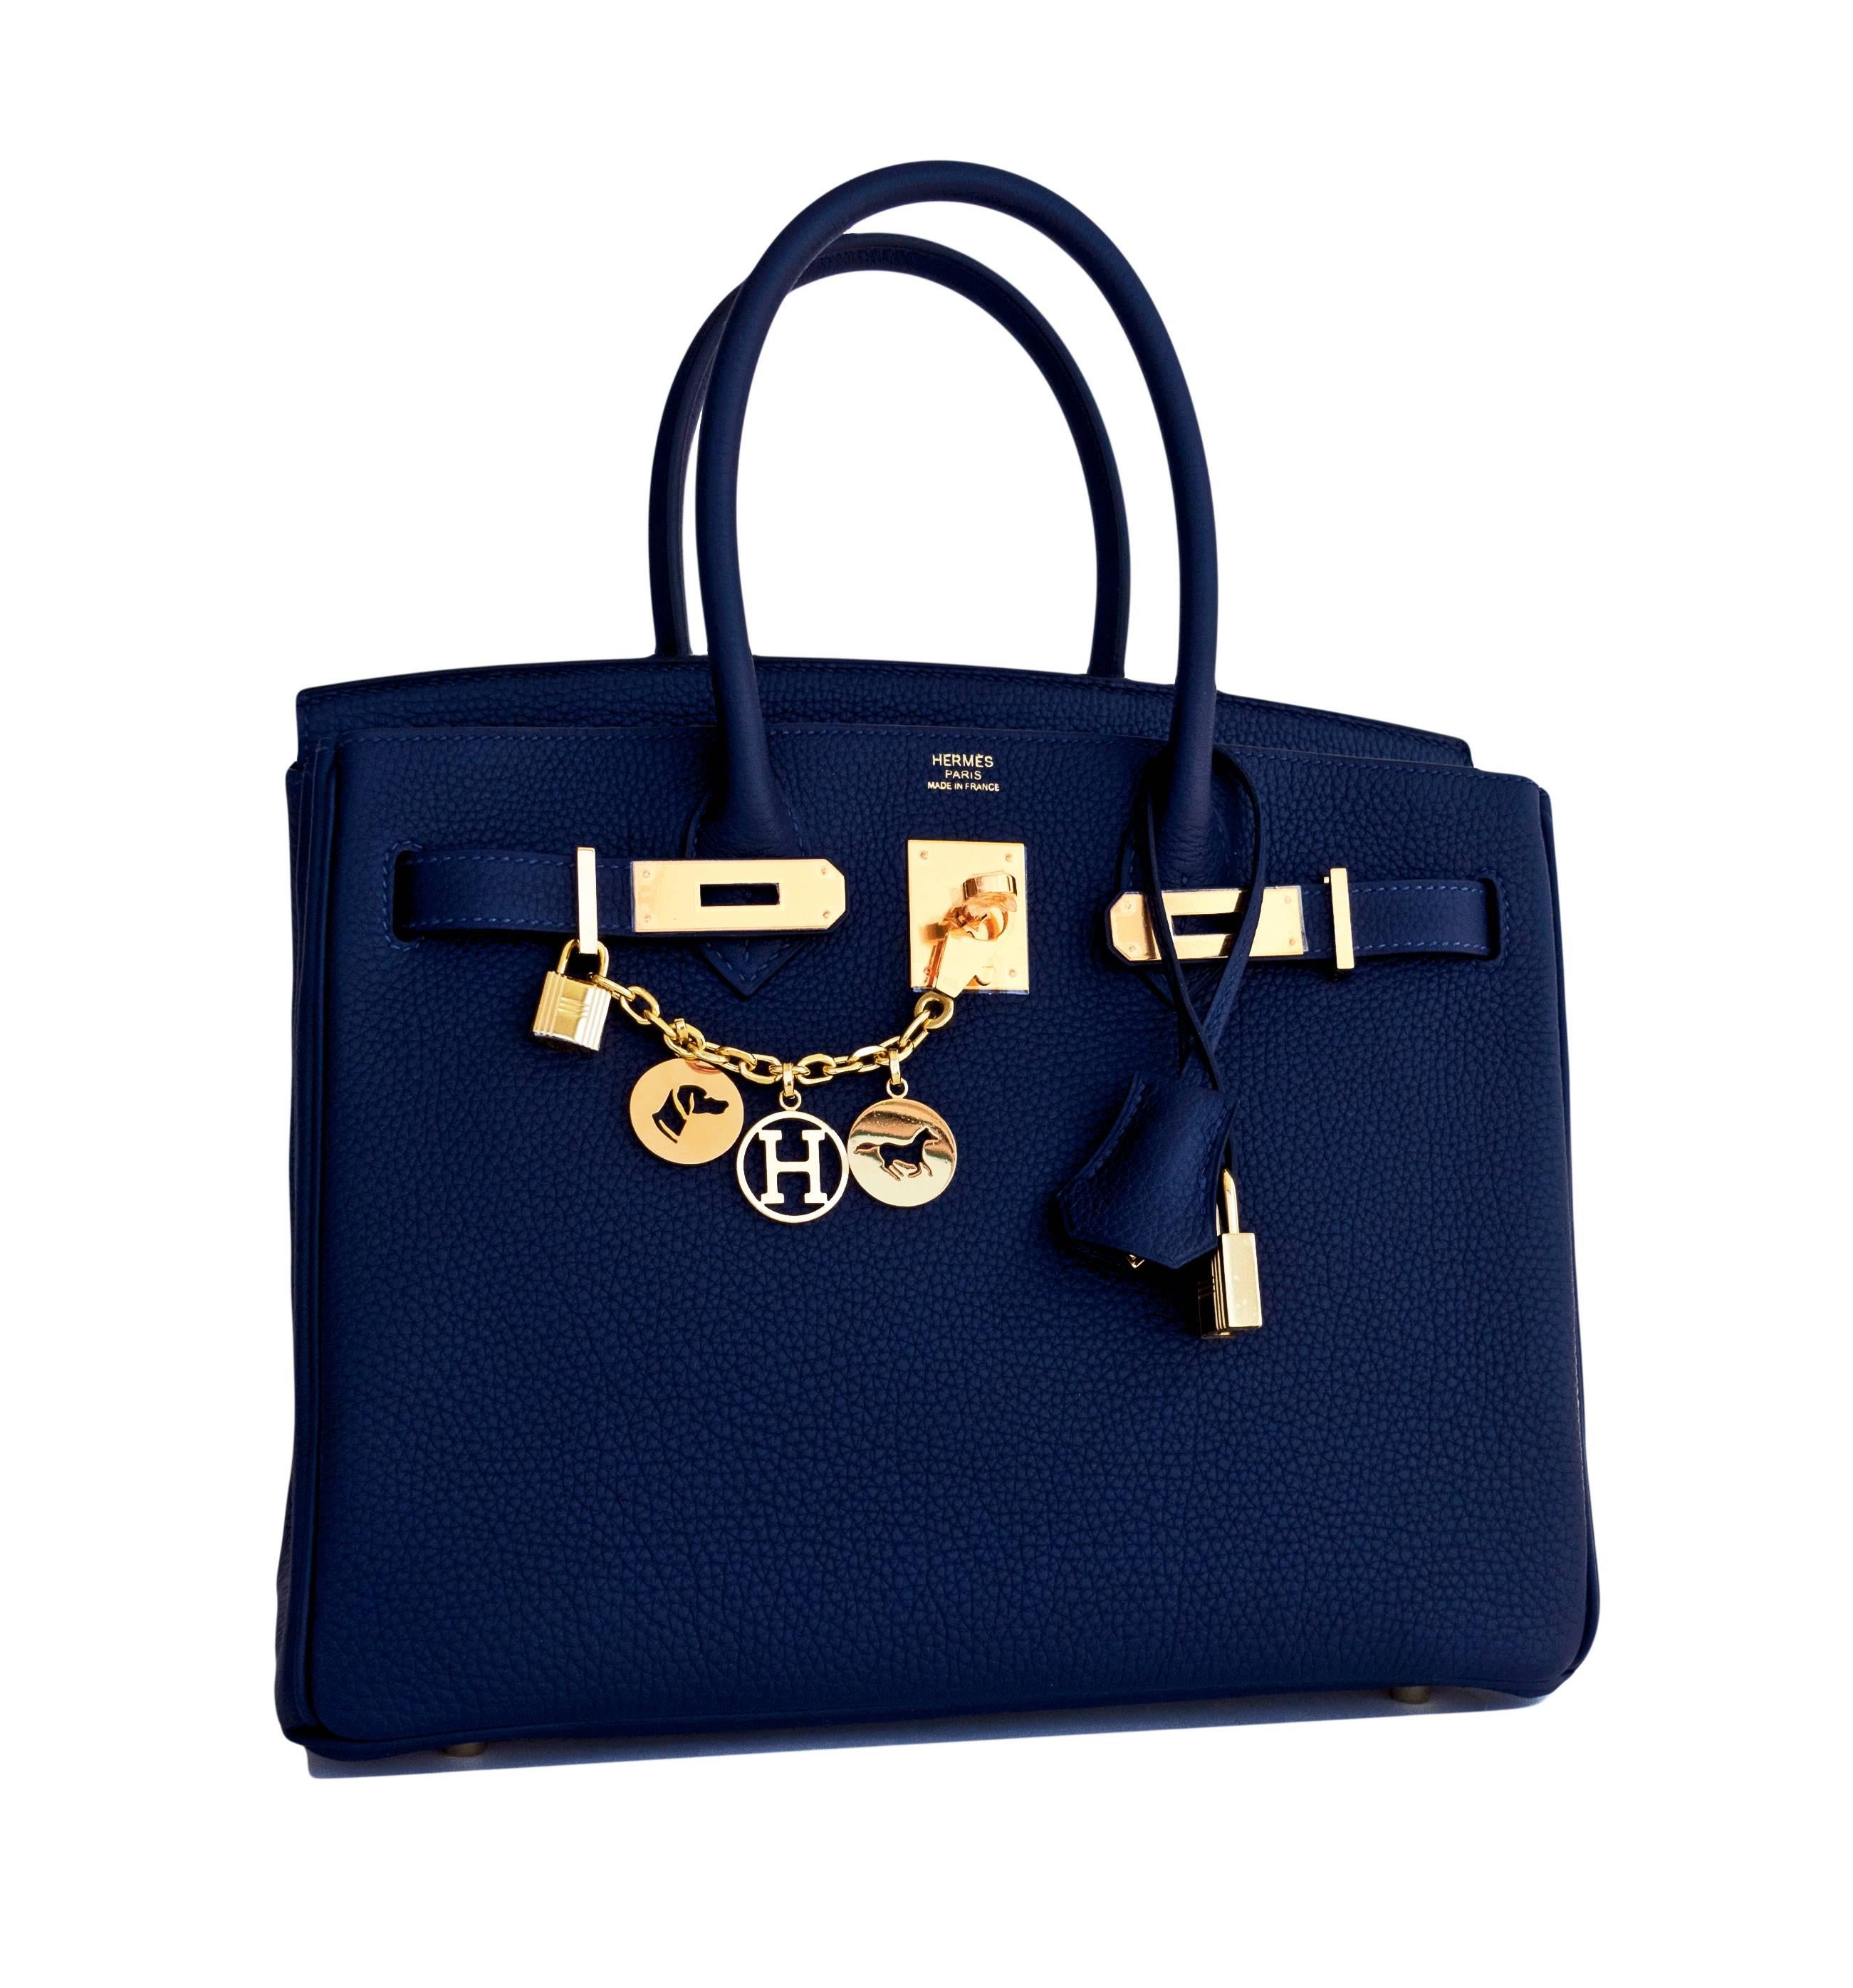 Hermes Navy Blue Nuit Togo 30cm Birkin Gold Hardware Bleu Nuit Jewel-Toned Navy
Store fresh. Pristine condition.  X interior stamp purchased from store in 2016. 
Perfect gift!  Comes with keys, lock, clochette, a sleeper for the bag, rain